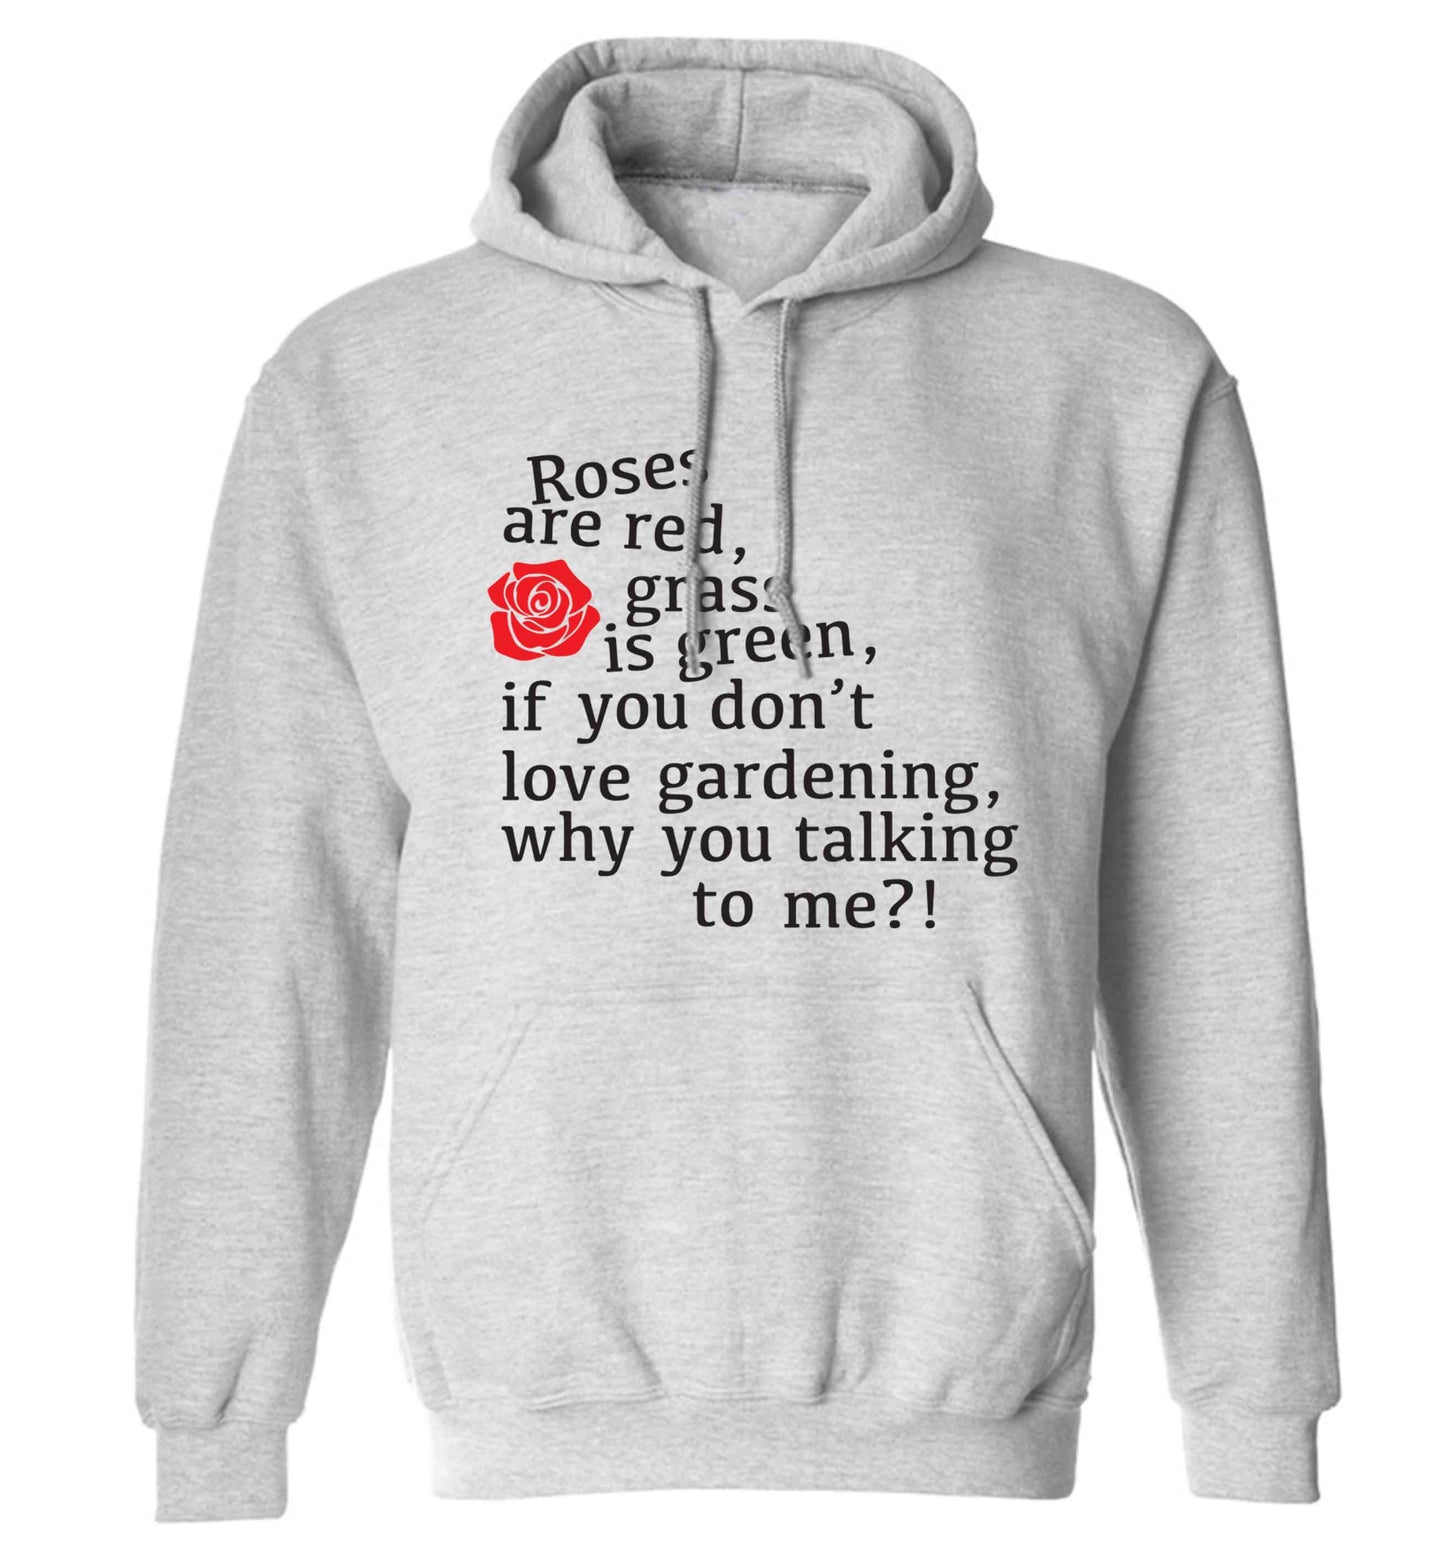 Roses are red, grass is green, if you don't love gardening, why you talking to me adults unisex grey hoodie 2XL